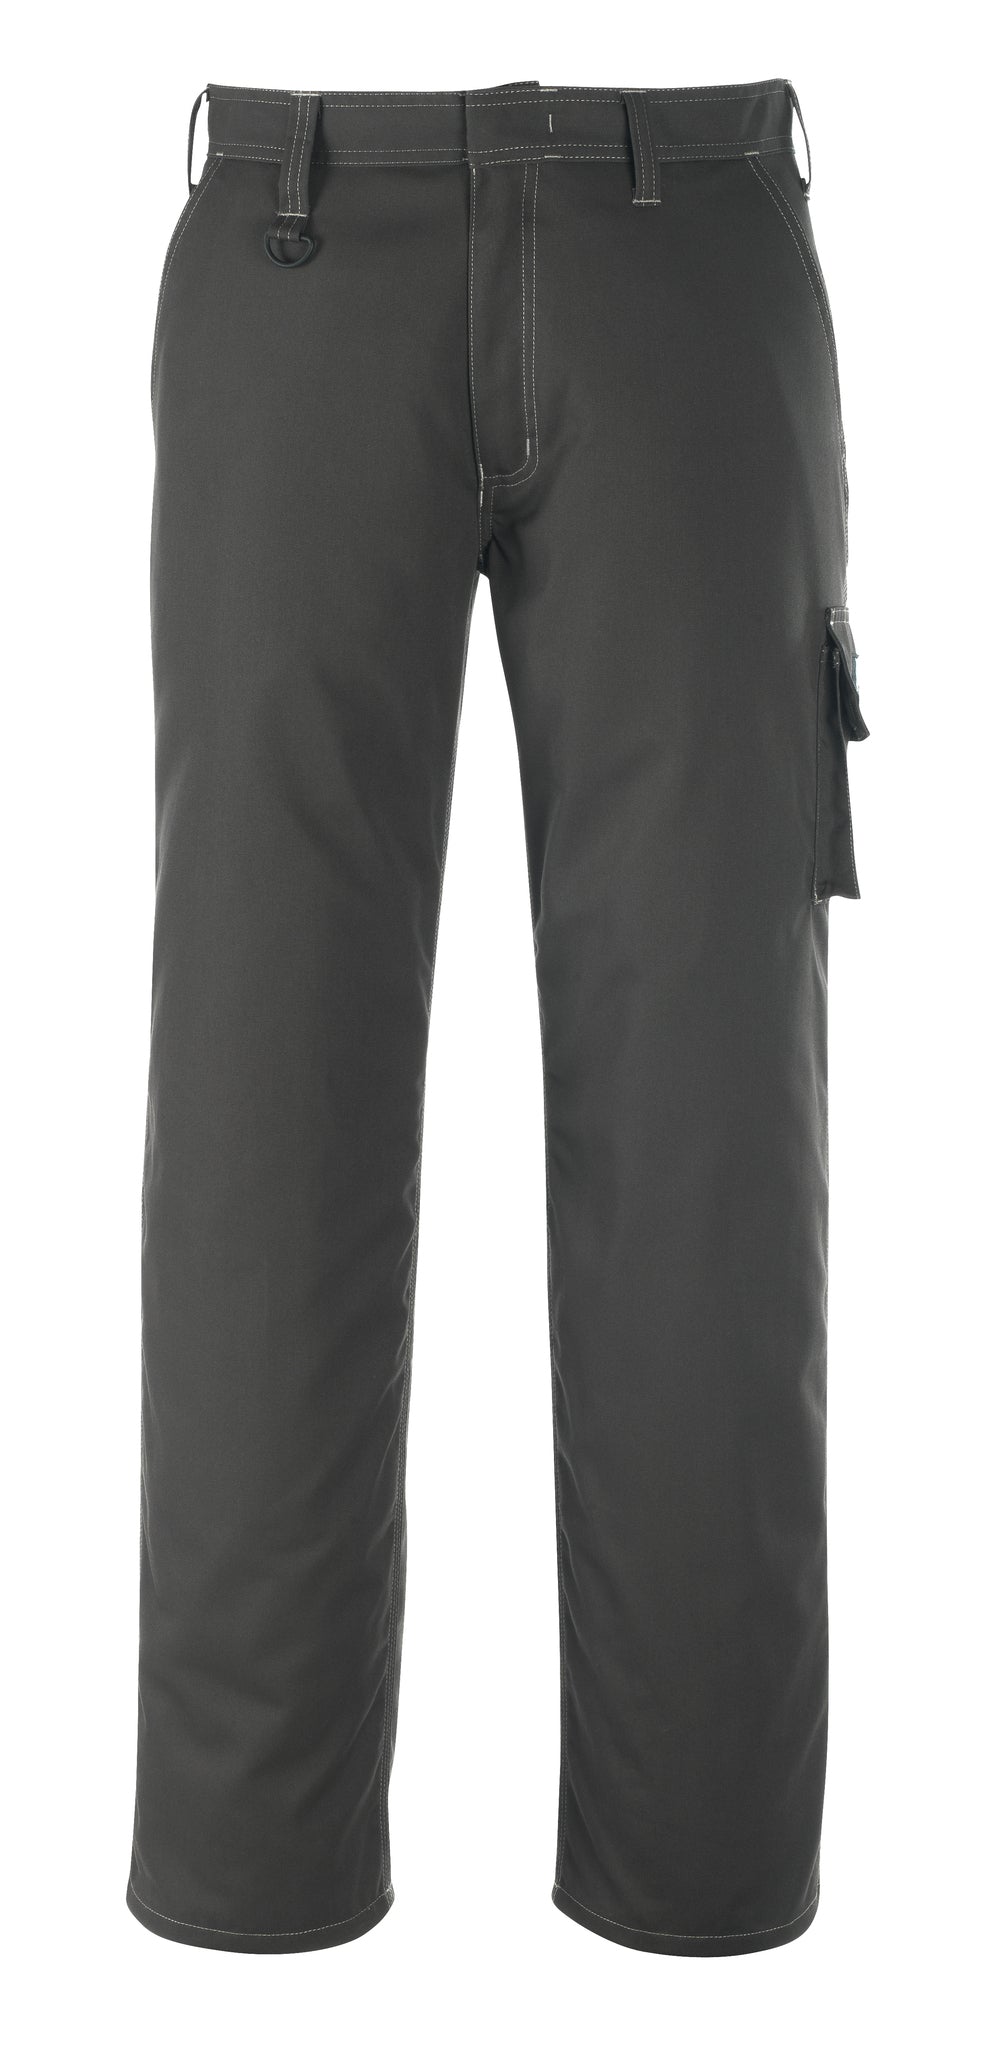 MASCOT®INDUSTRY Trousers with thigh pockets Berkeley 13579 - DaltonSafety